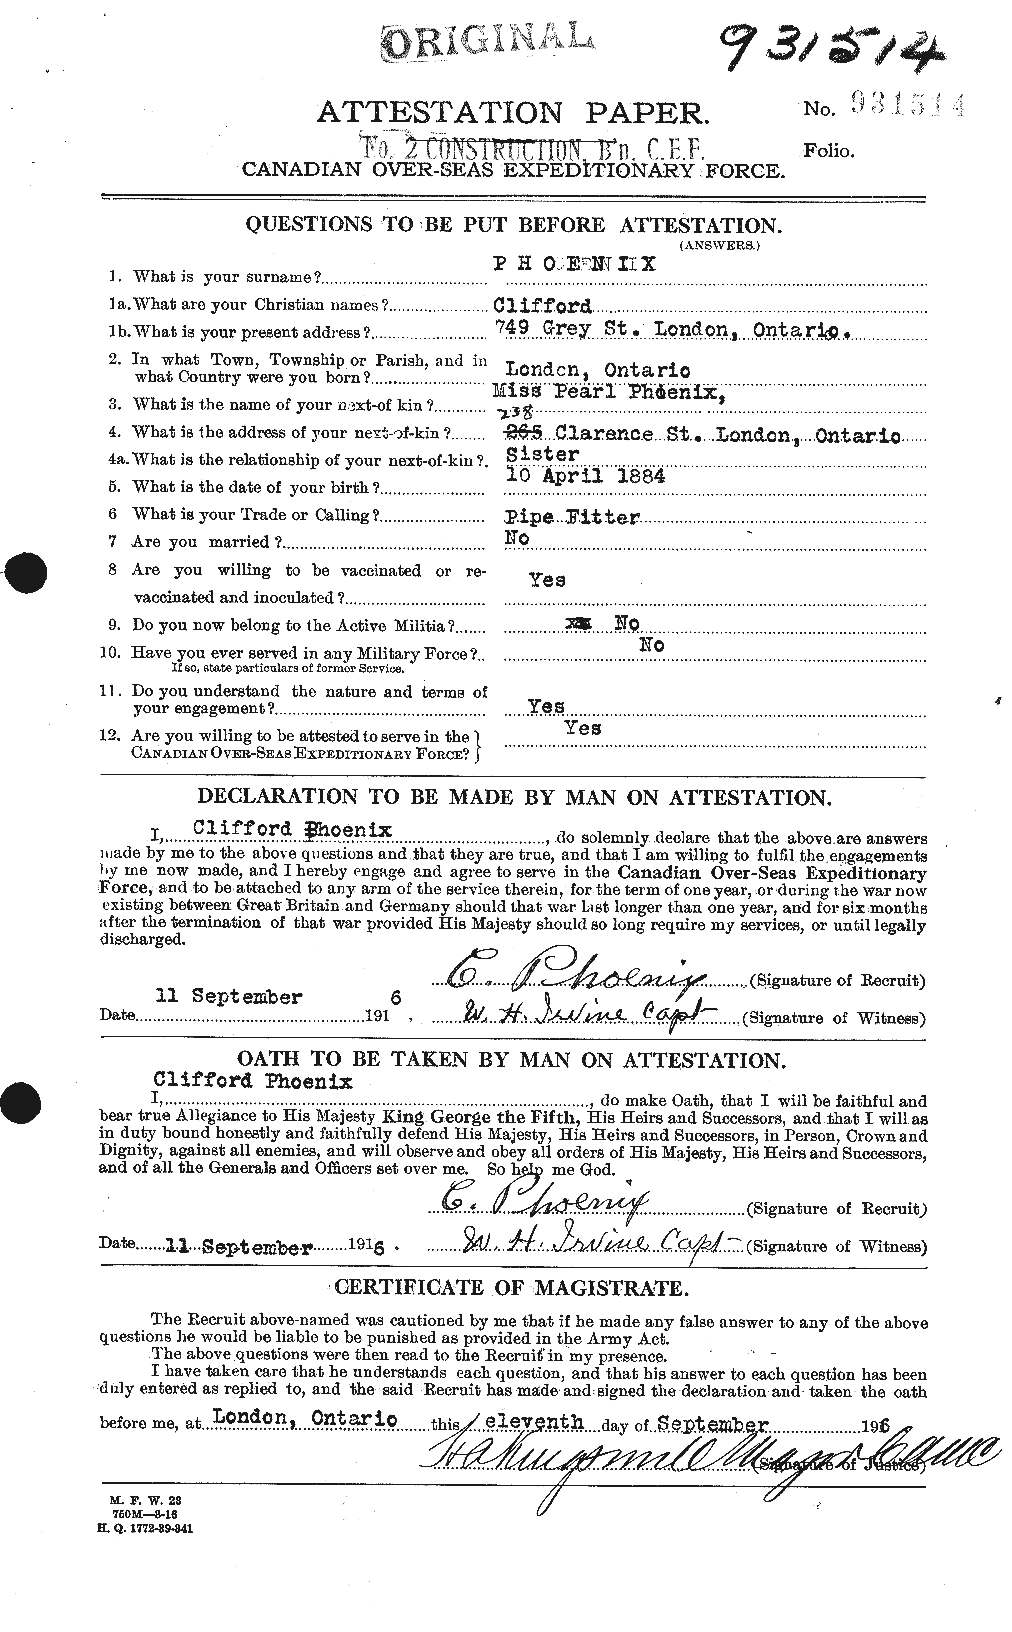 Personnel Records of the First World War - CEF 578216a